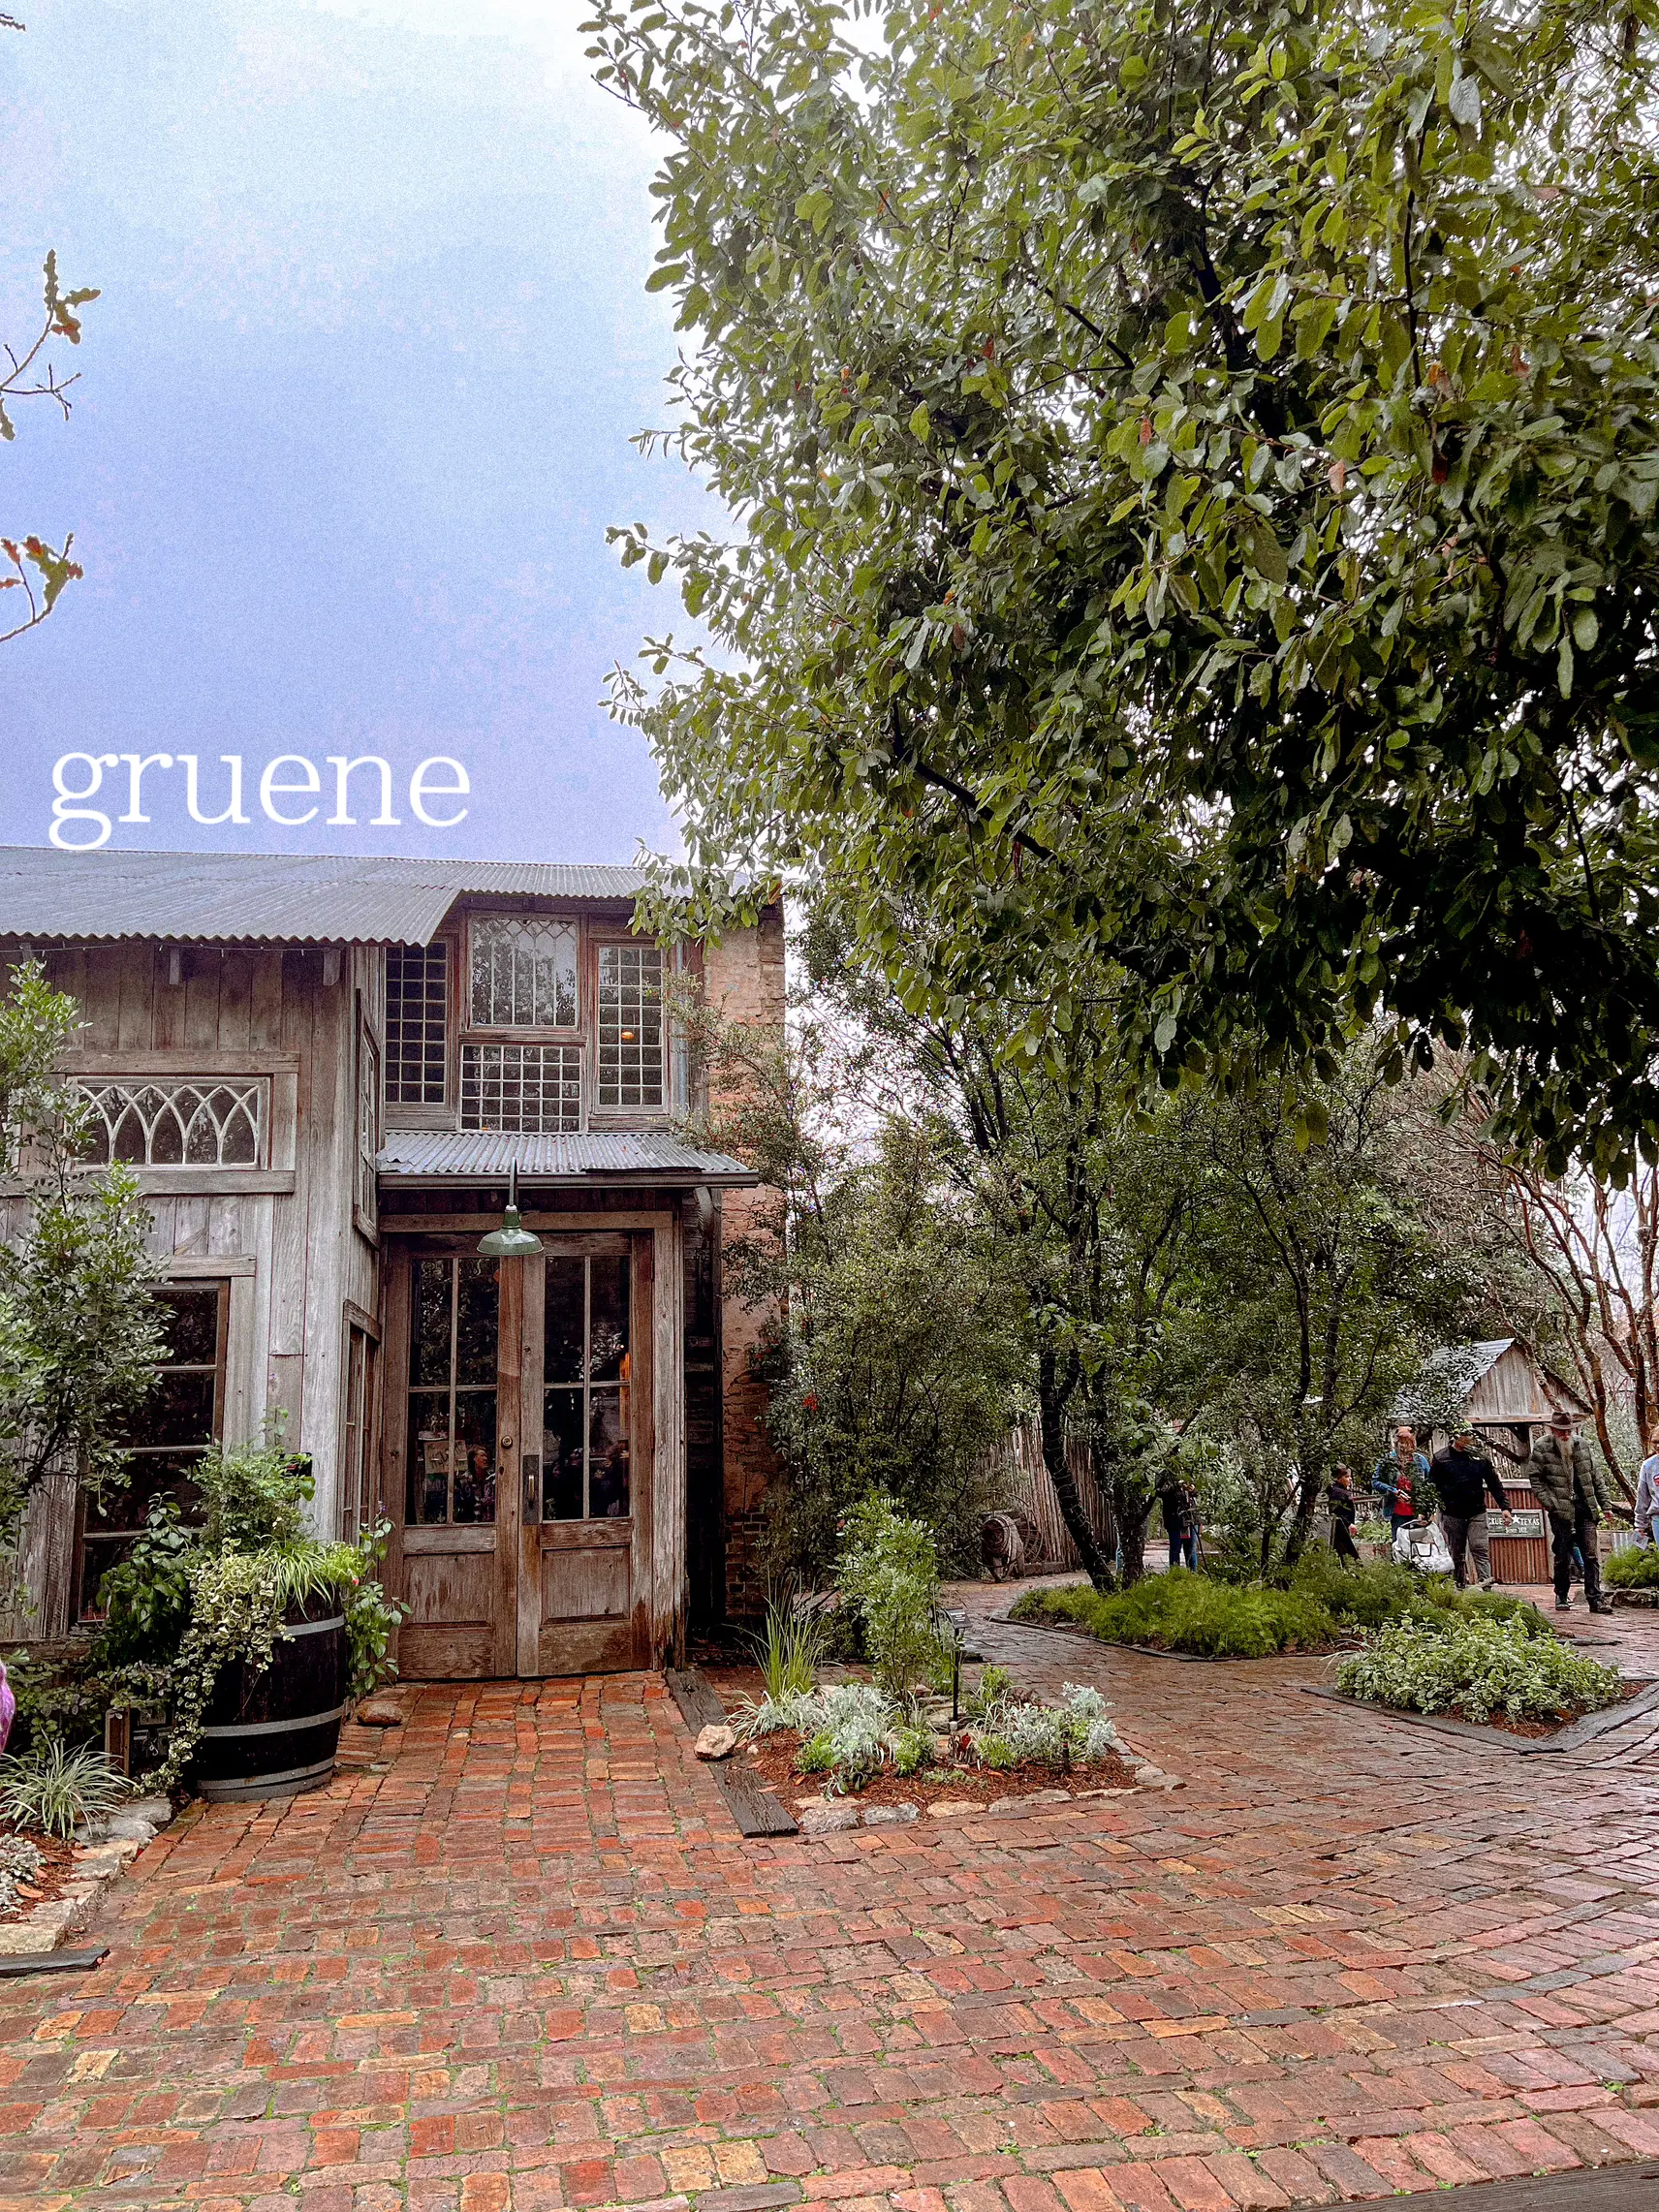  A brick road with a tree and a sign that says gruene.